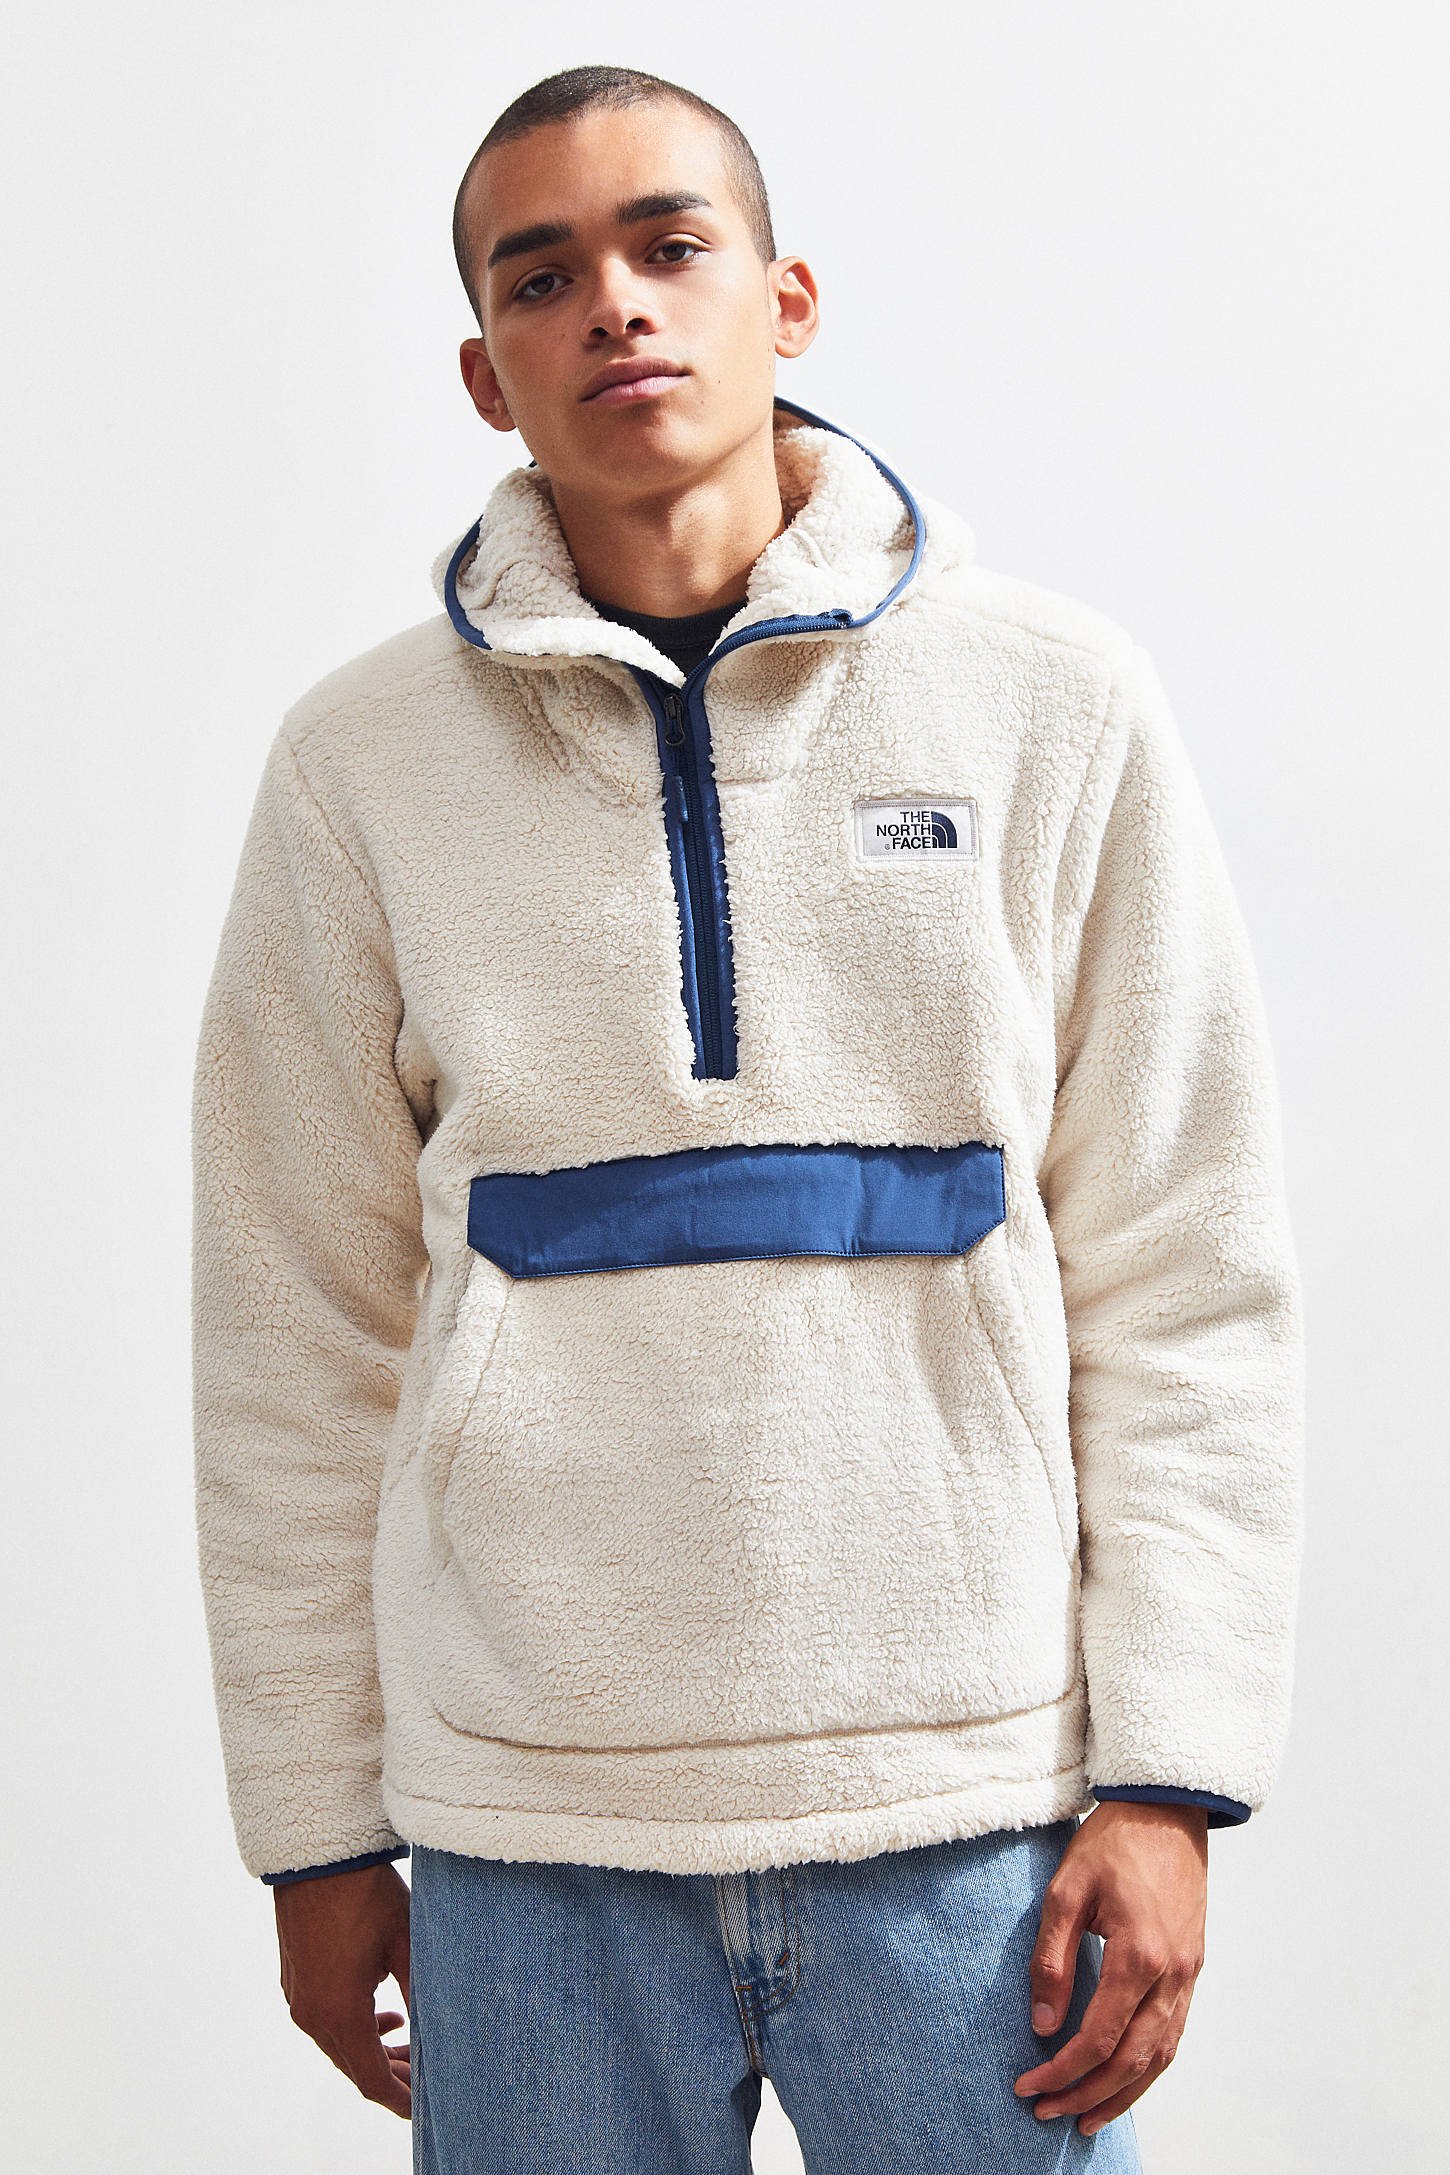 sherpa pullover north face